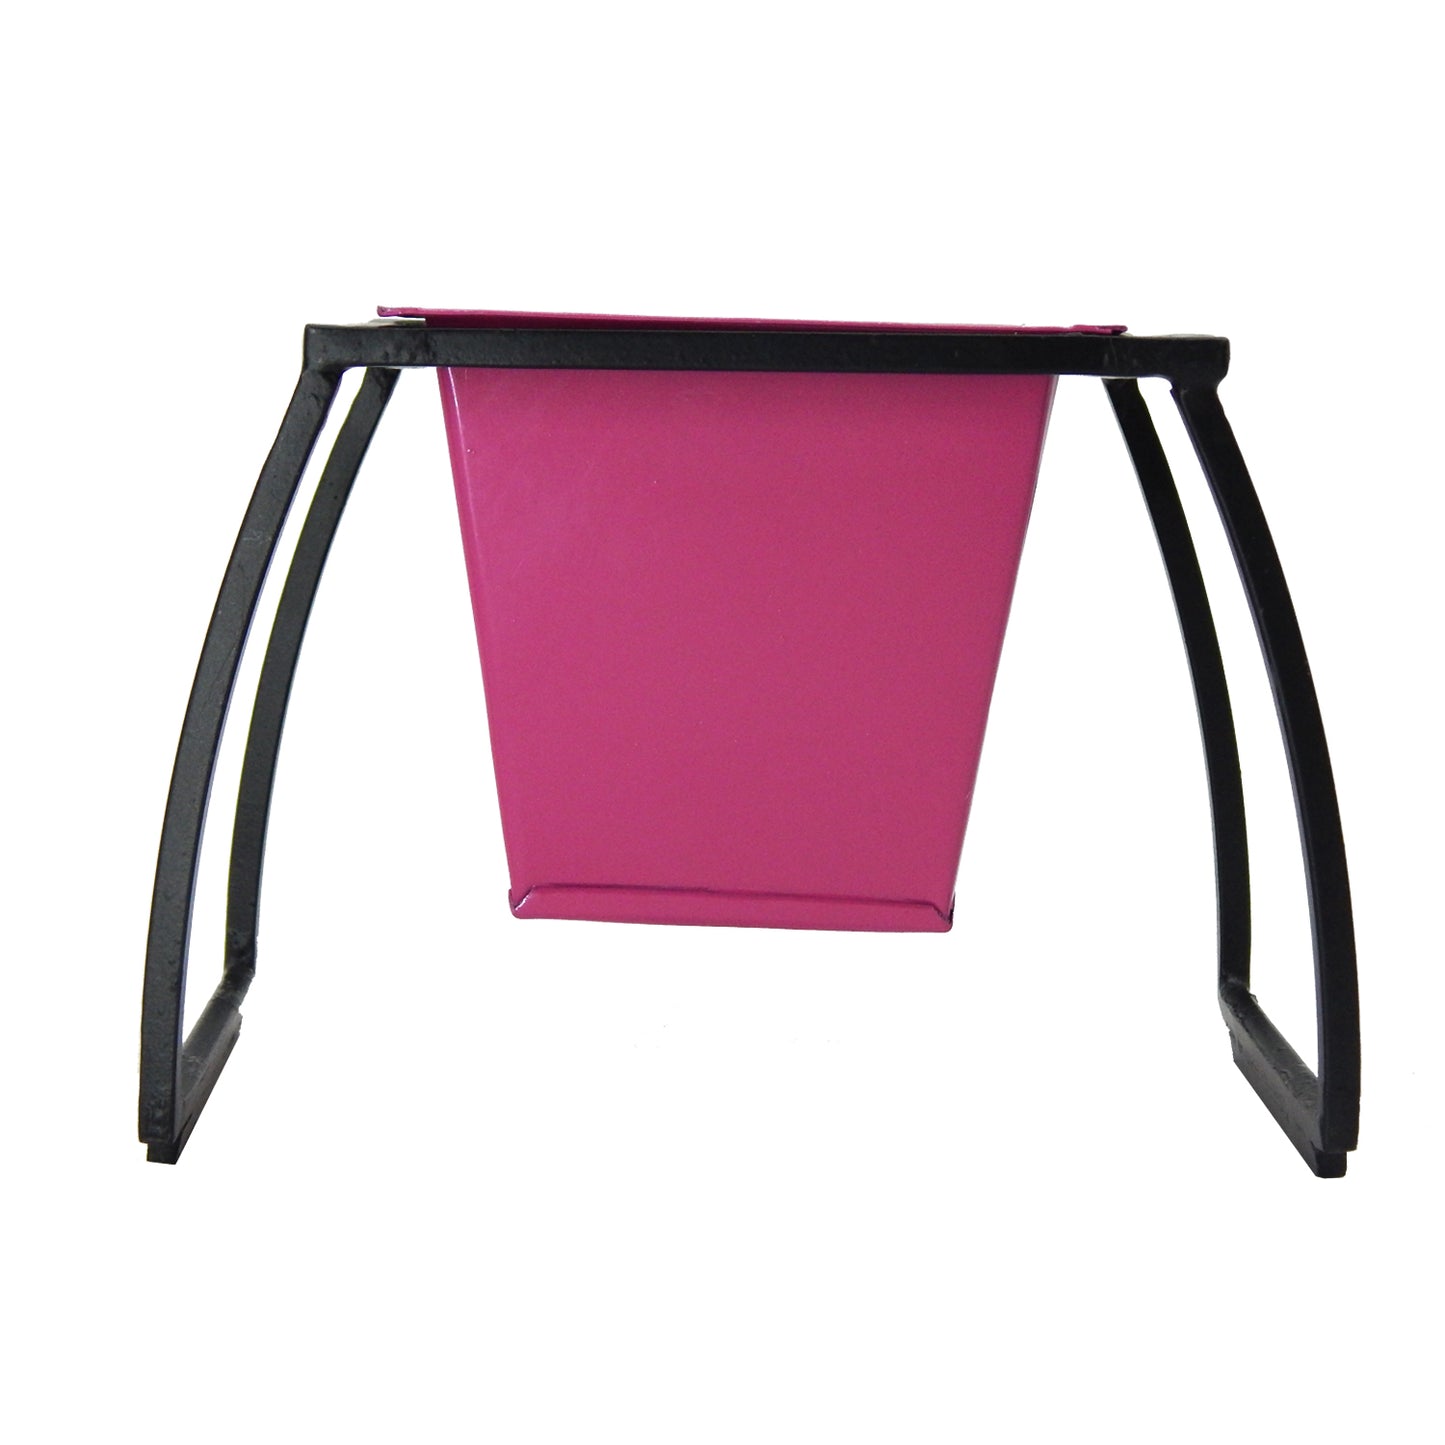 ecofynd Stackable Table Top Planter Pot with Metal Stand, Pink Desktop Planter freeshipping - Ecofynd